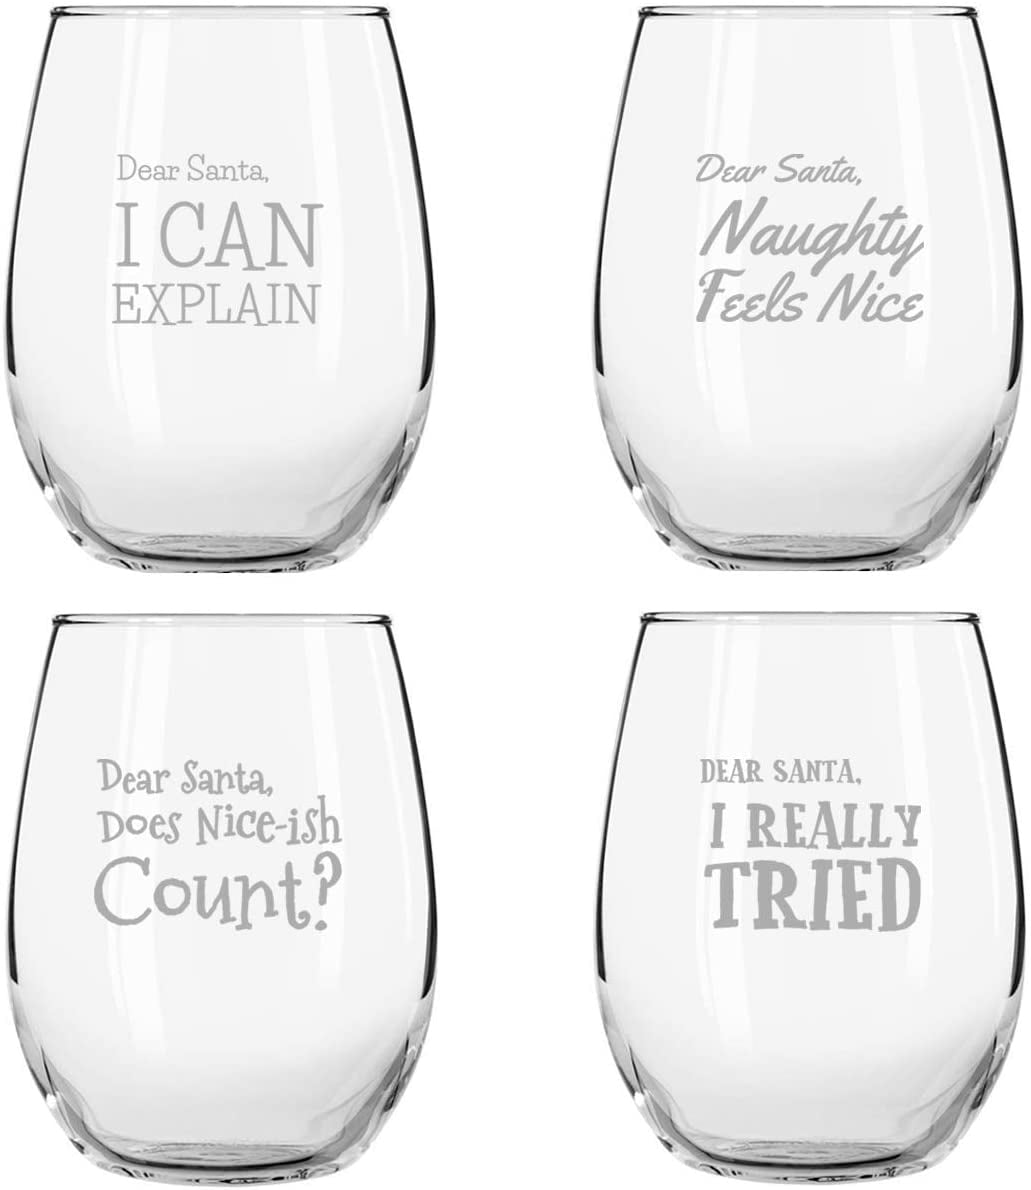 Funny Christmas Wine Glasses - Santa Printed Stemless Wine Glass Set of 4 -  Wine Holiday Gifts for H…See more Funny Christmas Wine Glasses - Santa